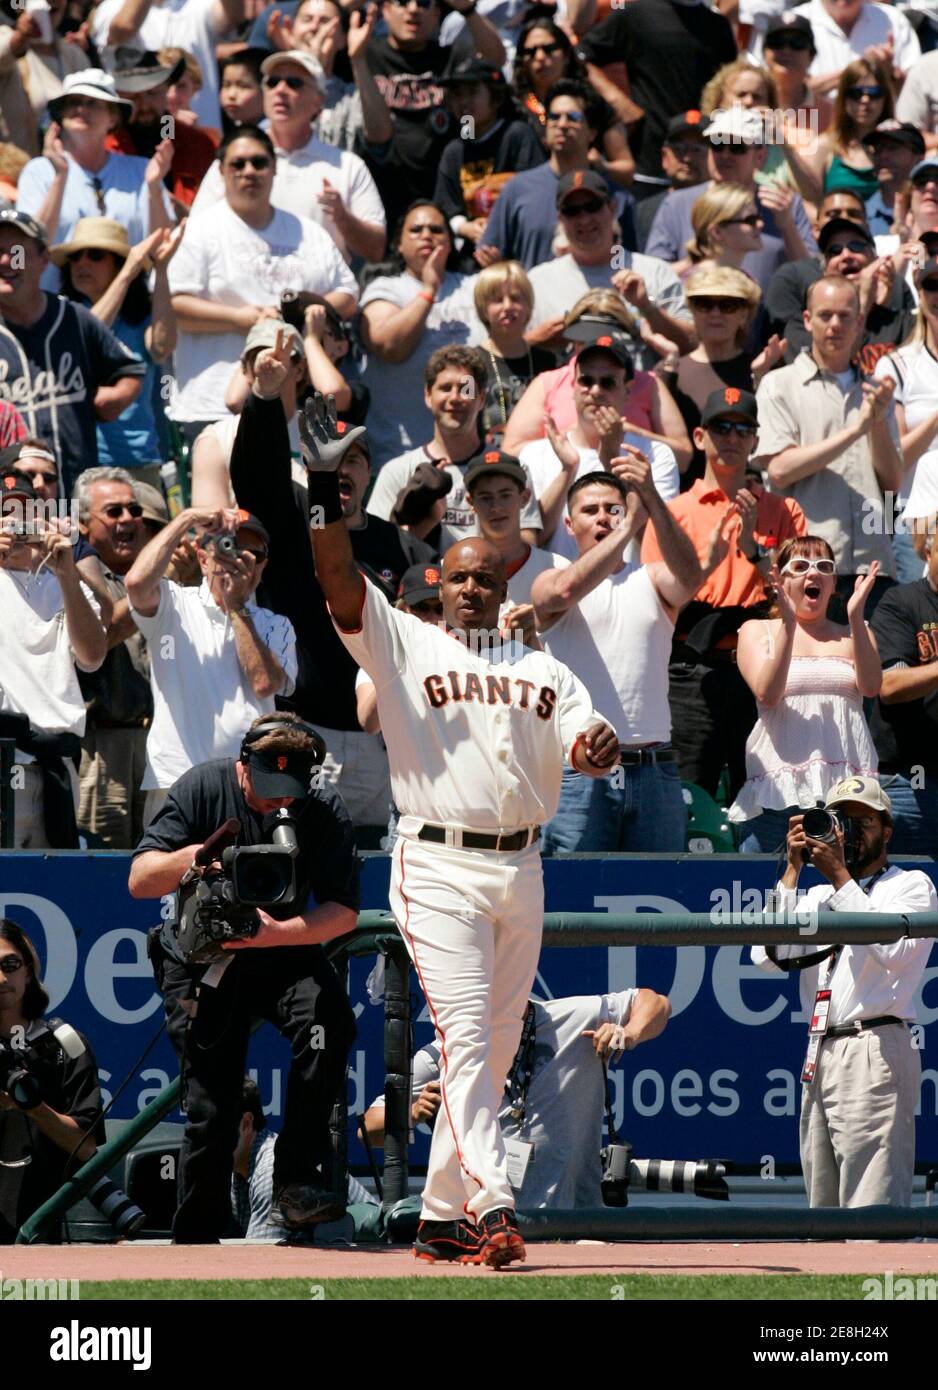 San Francisco Giants slugger Barry Bonds acknowledges the crowd after he hit his 715th career home run against the Colorado Rockies in the fourth inning in San Francisco May 28, 2006. Bonds takes second place for career home runs surpassing Babe Ruth. REUTERS/Rick Wilking Stock Photo